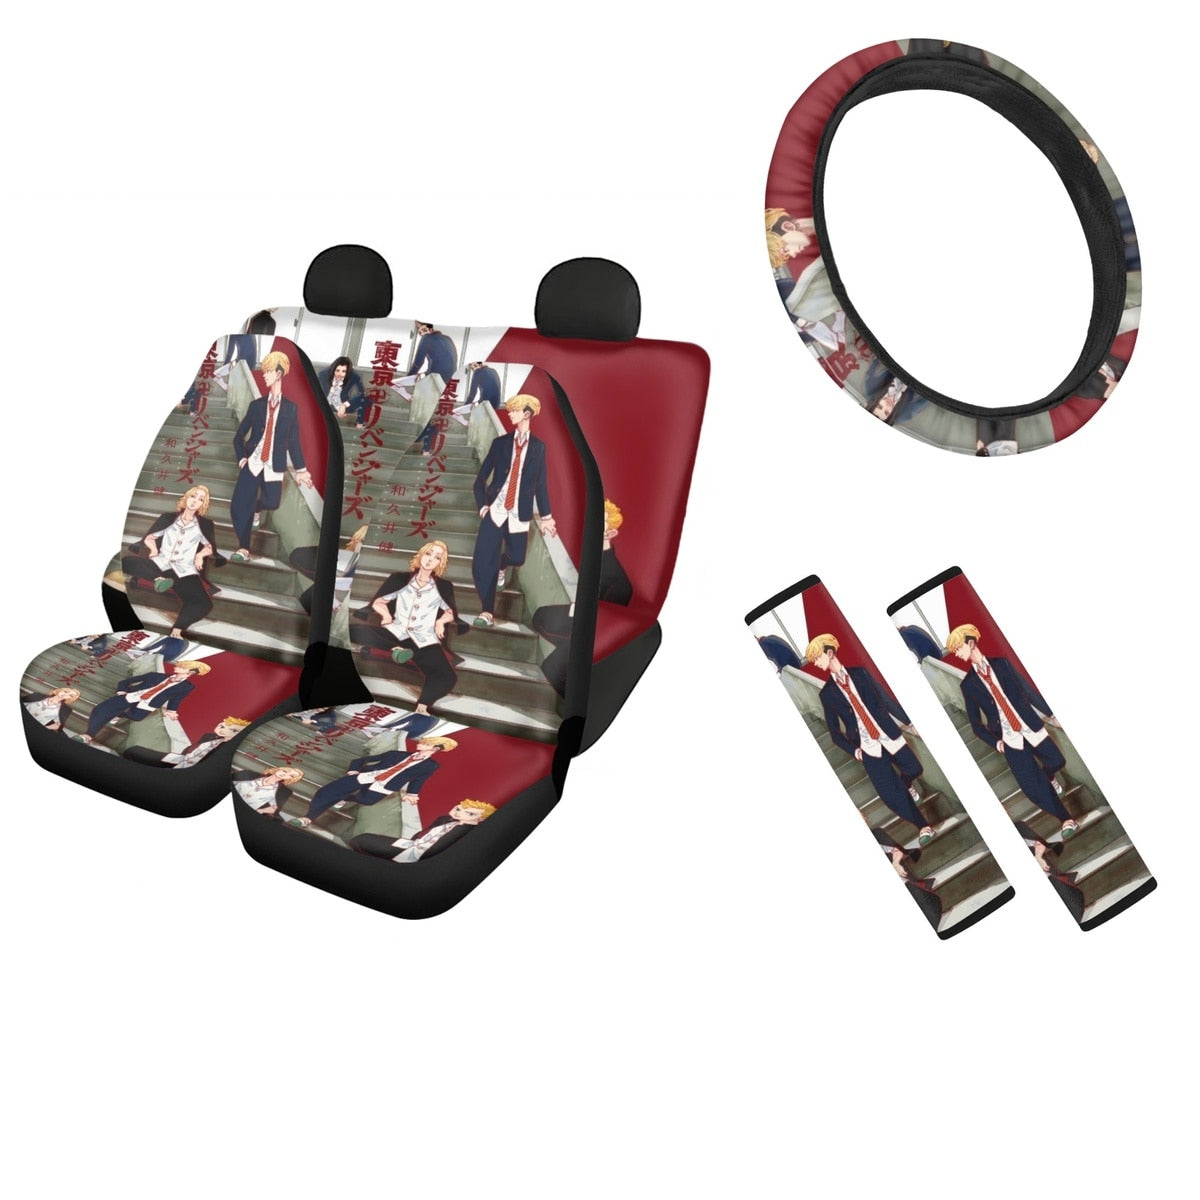 Japan Anime Car Seat Covers Tokyo Revengers Theme Pattern Comfortable Auto Seat Belt Pads Cover Easy Clean Steering Wheel Cover, everythinganimee